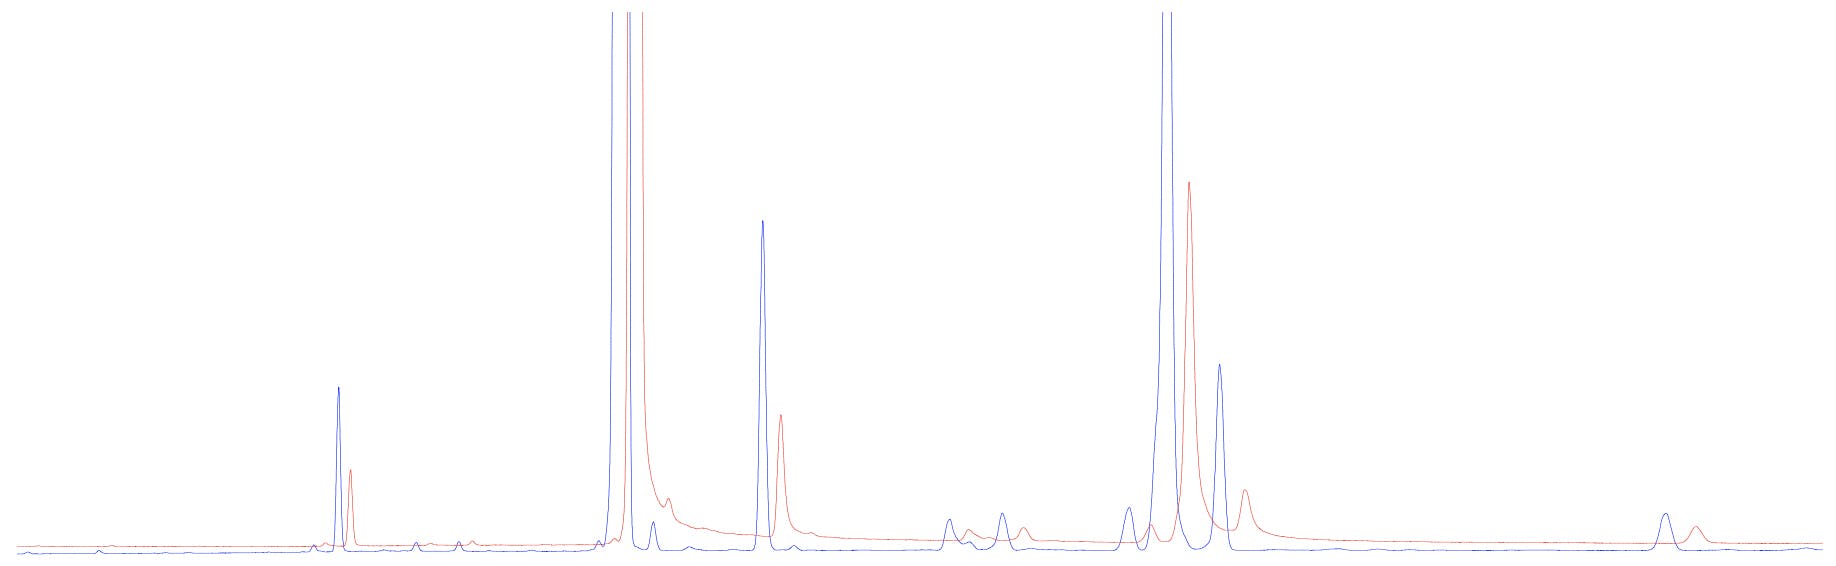 Reduction in peak area of all chromatographic peaks with accompanying shift in retention time.